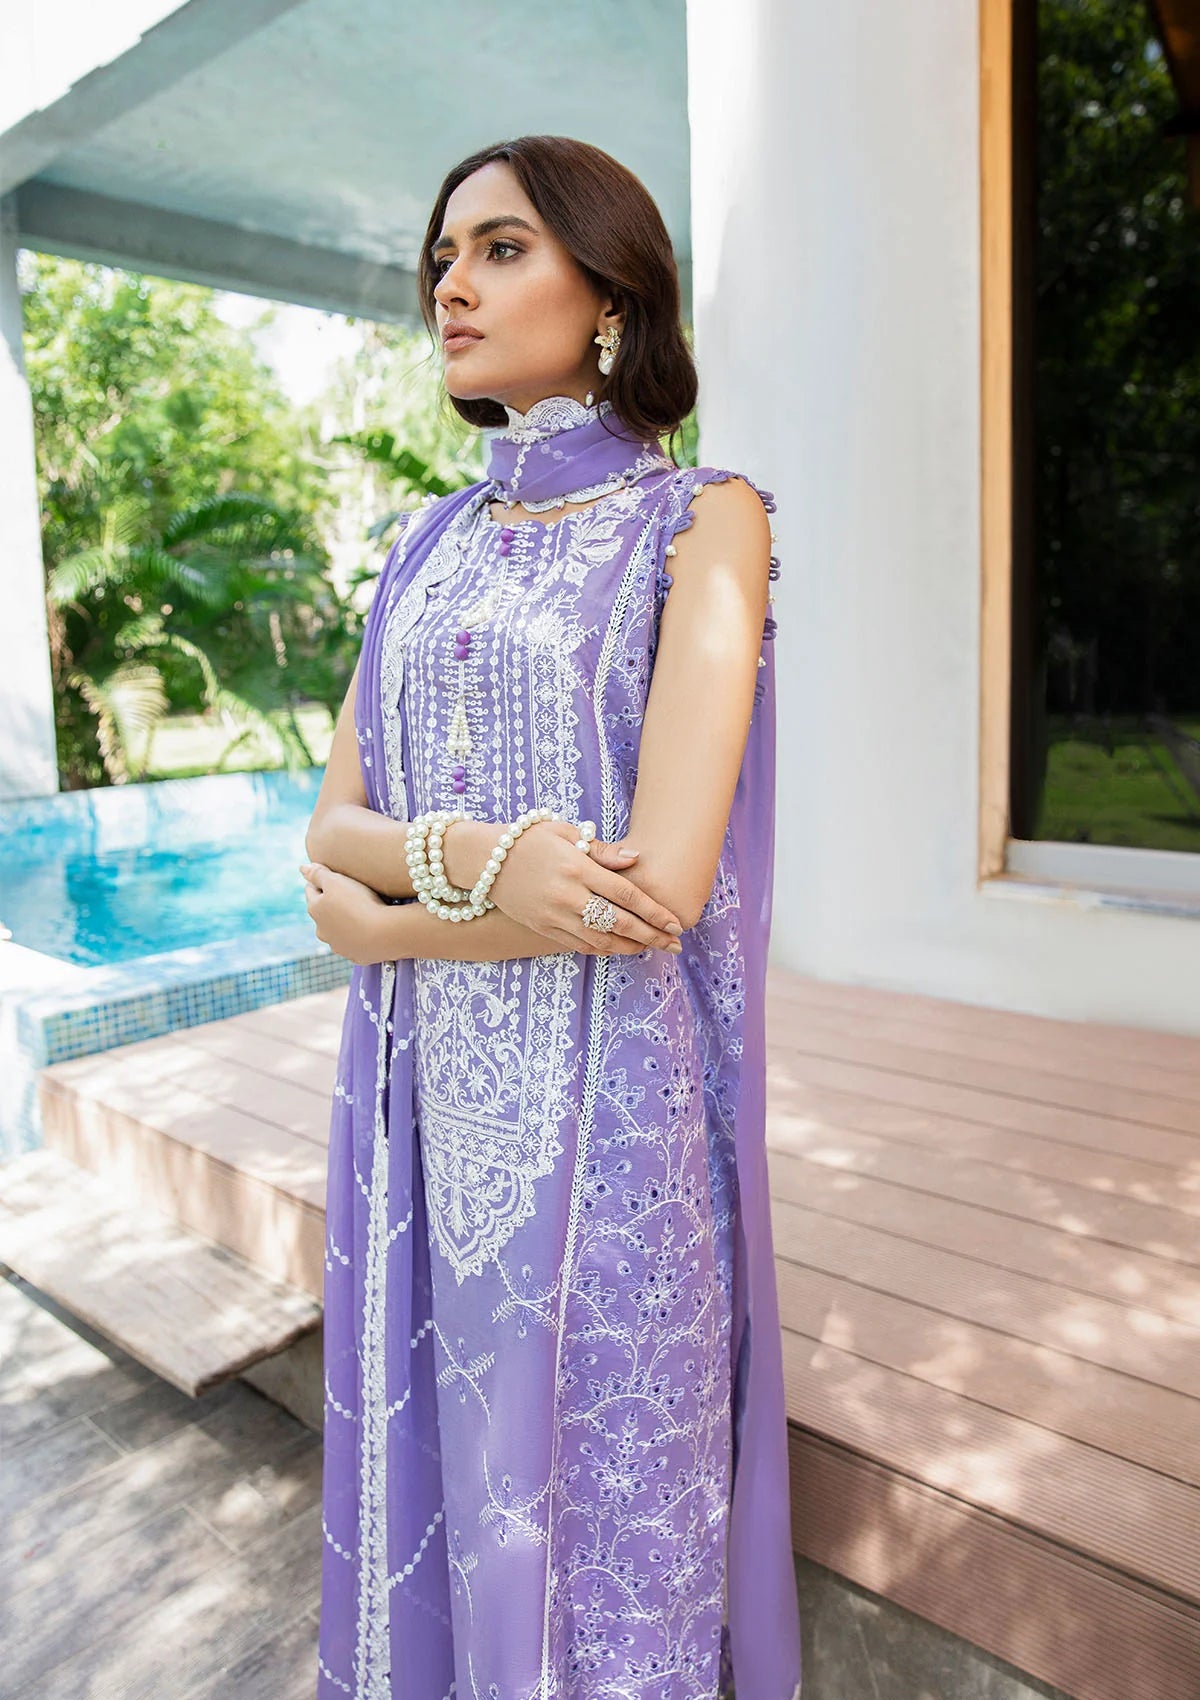 Buy Now, LOOK 4A - AIK Lawn'23 - Vol. 2 - Shahana Collection UK - Wedding and Bridal Party Dresses - Aik Atelier 